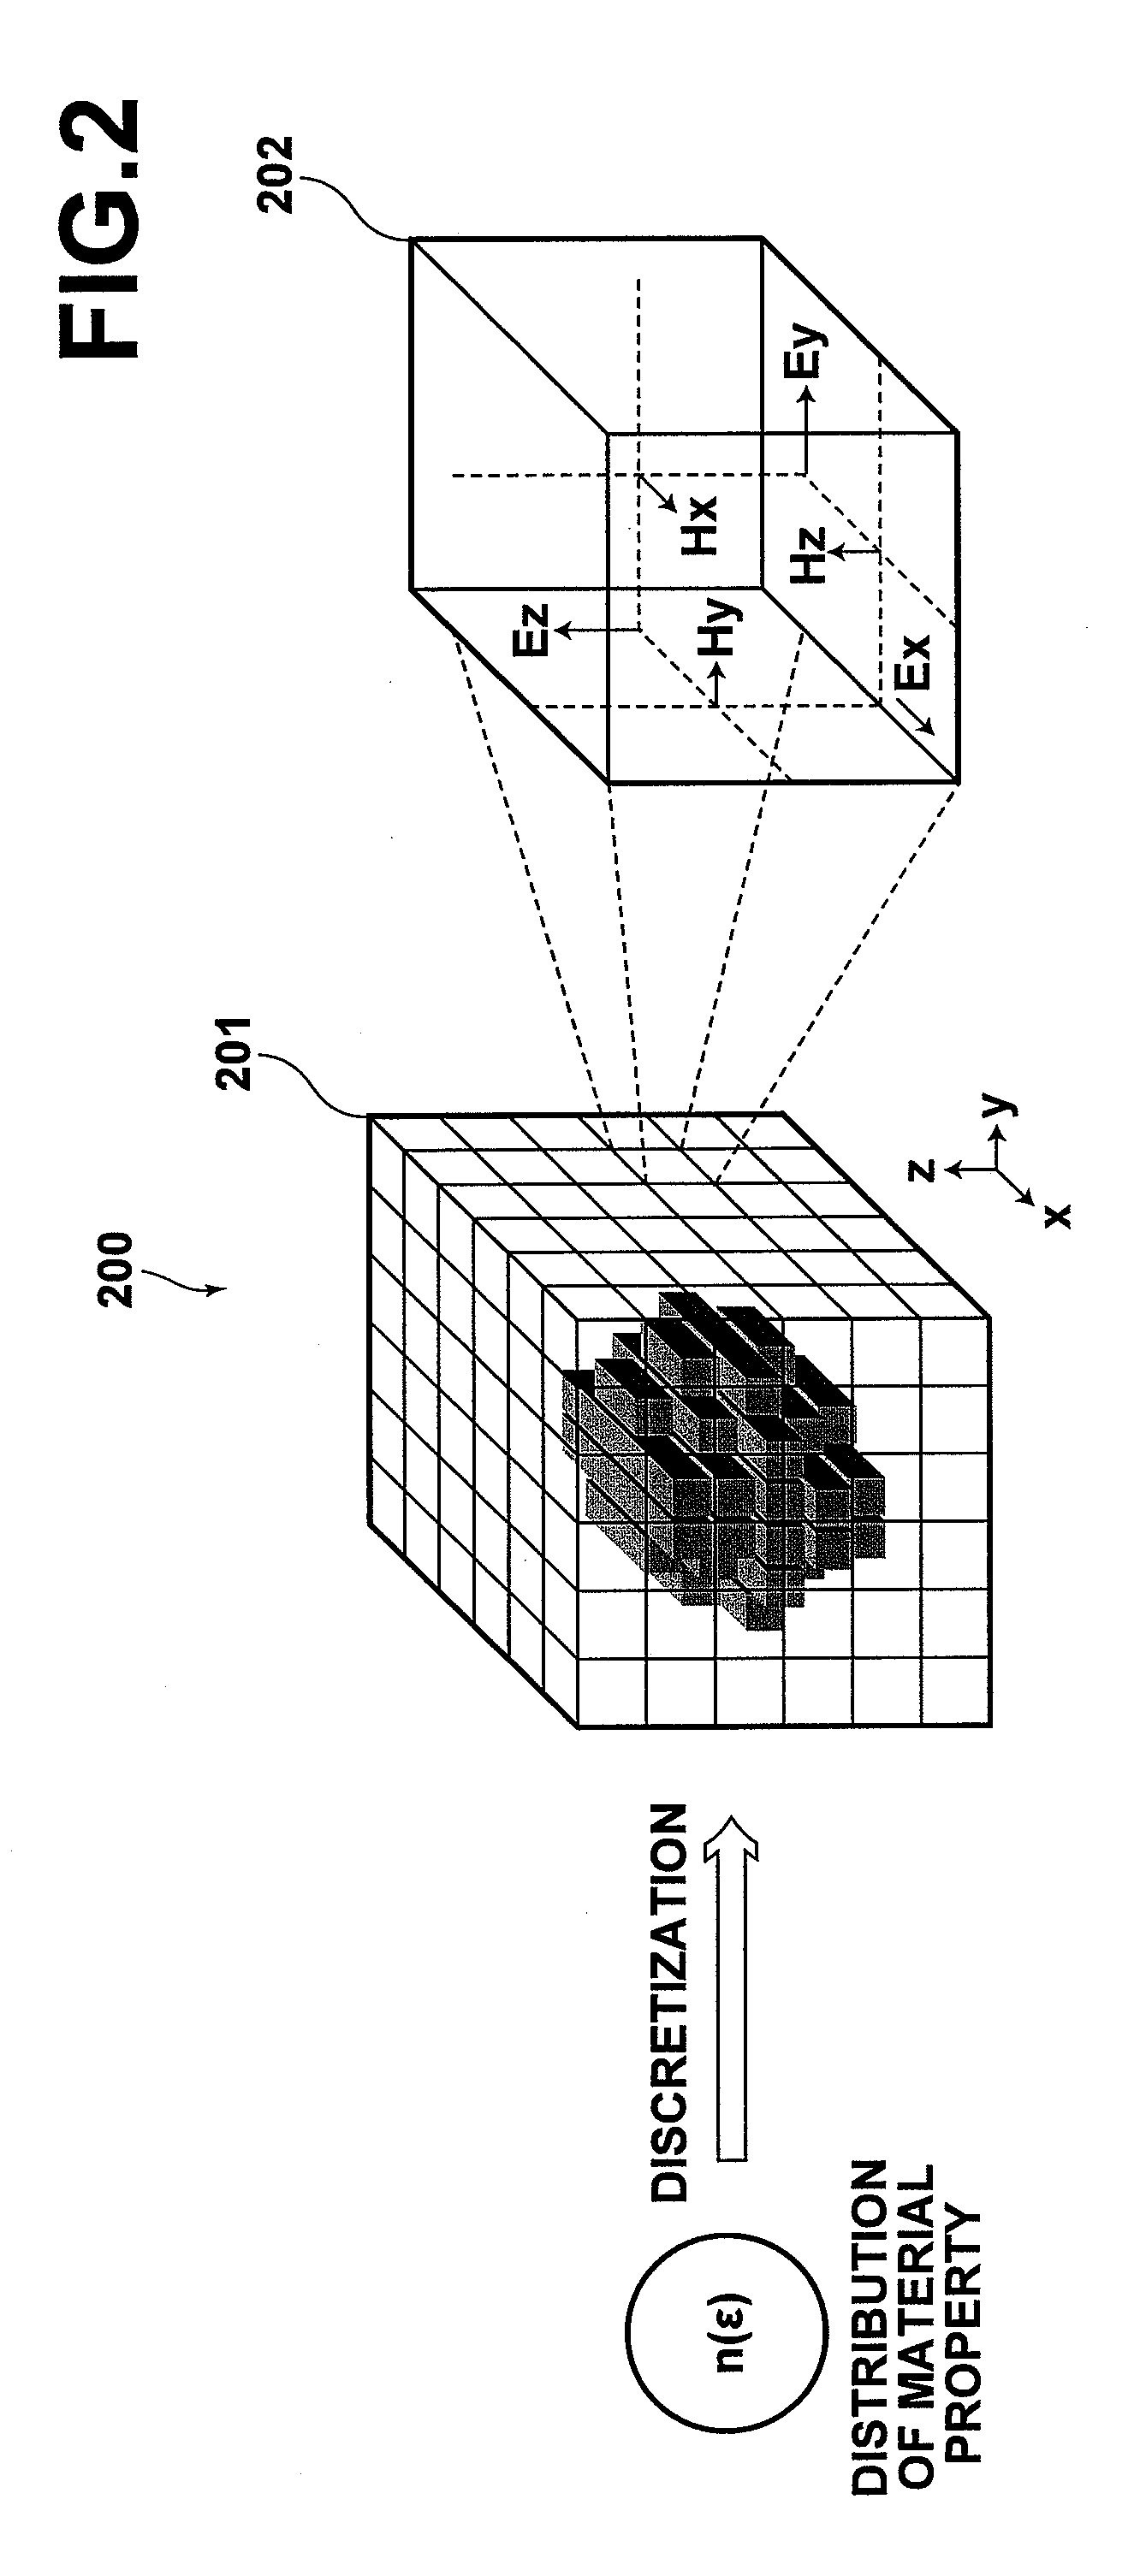 Apparatus and program for analyzing electromagnetic field